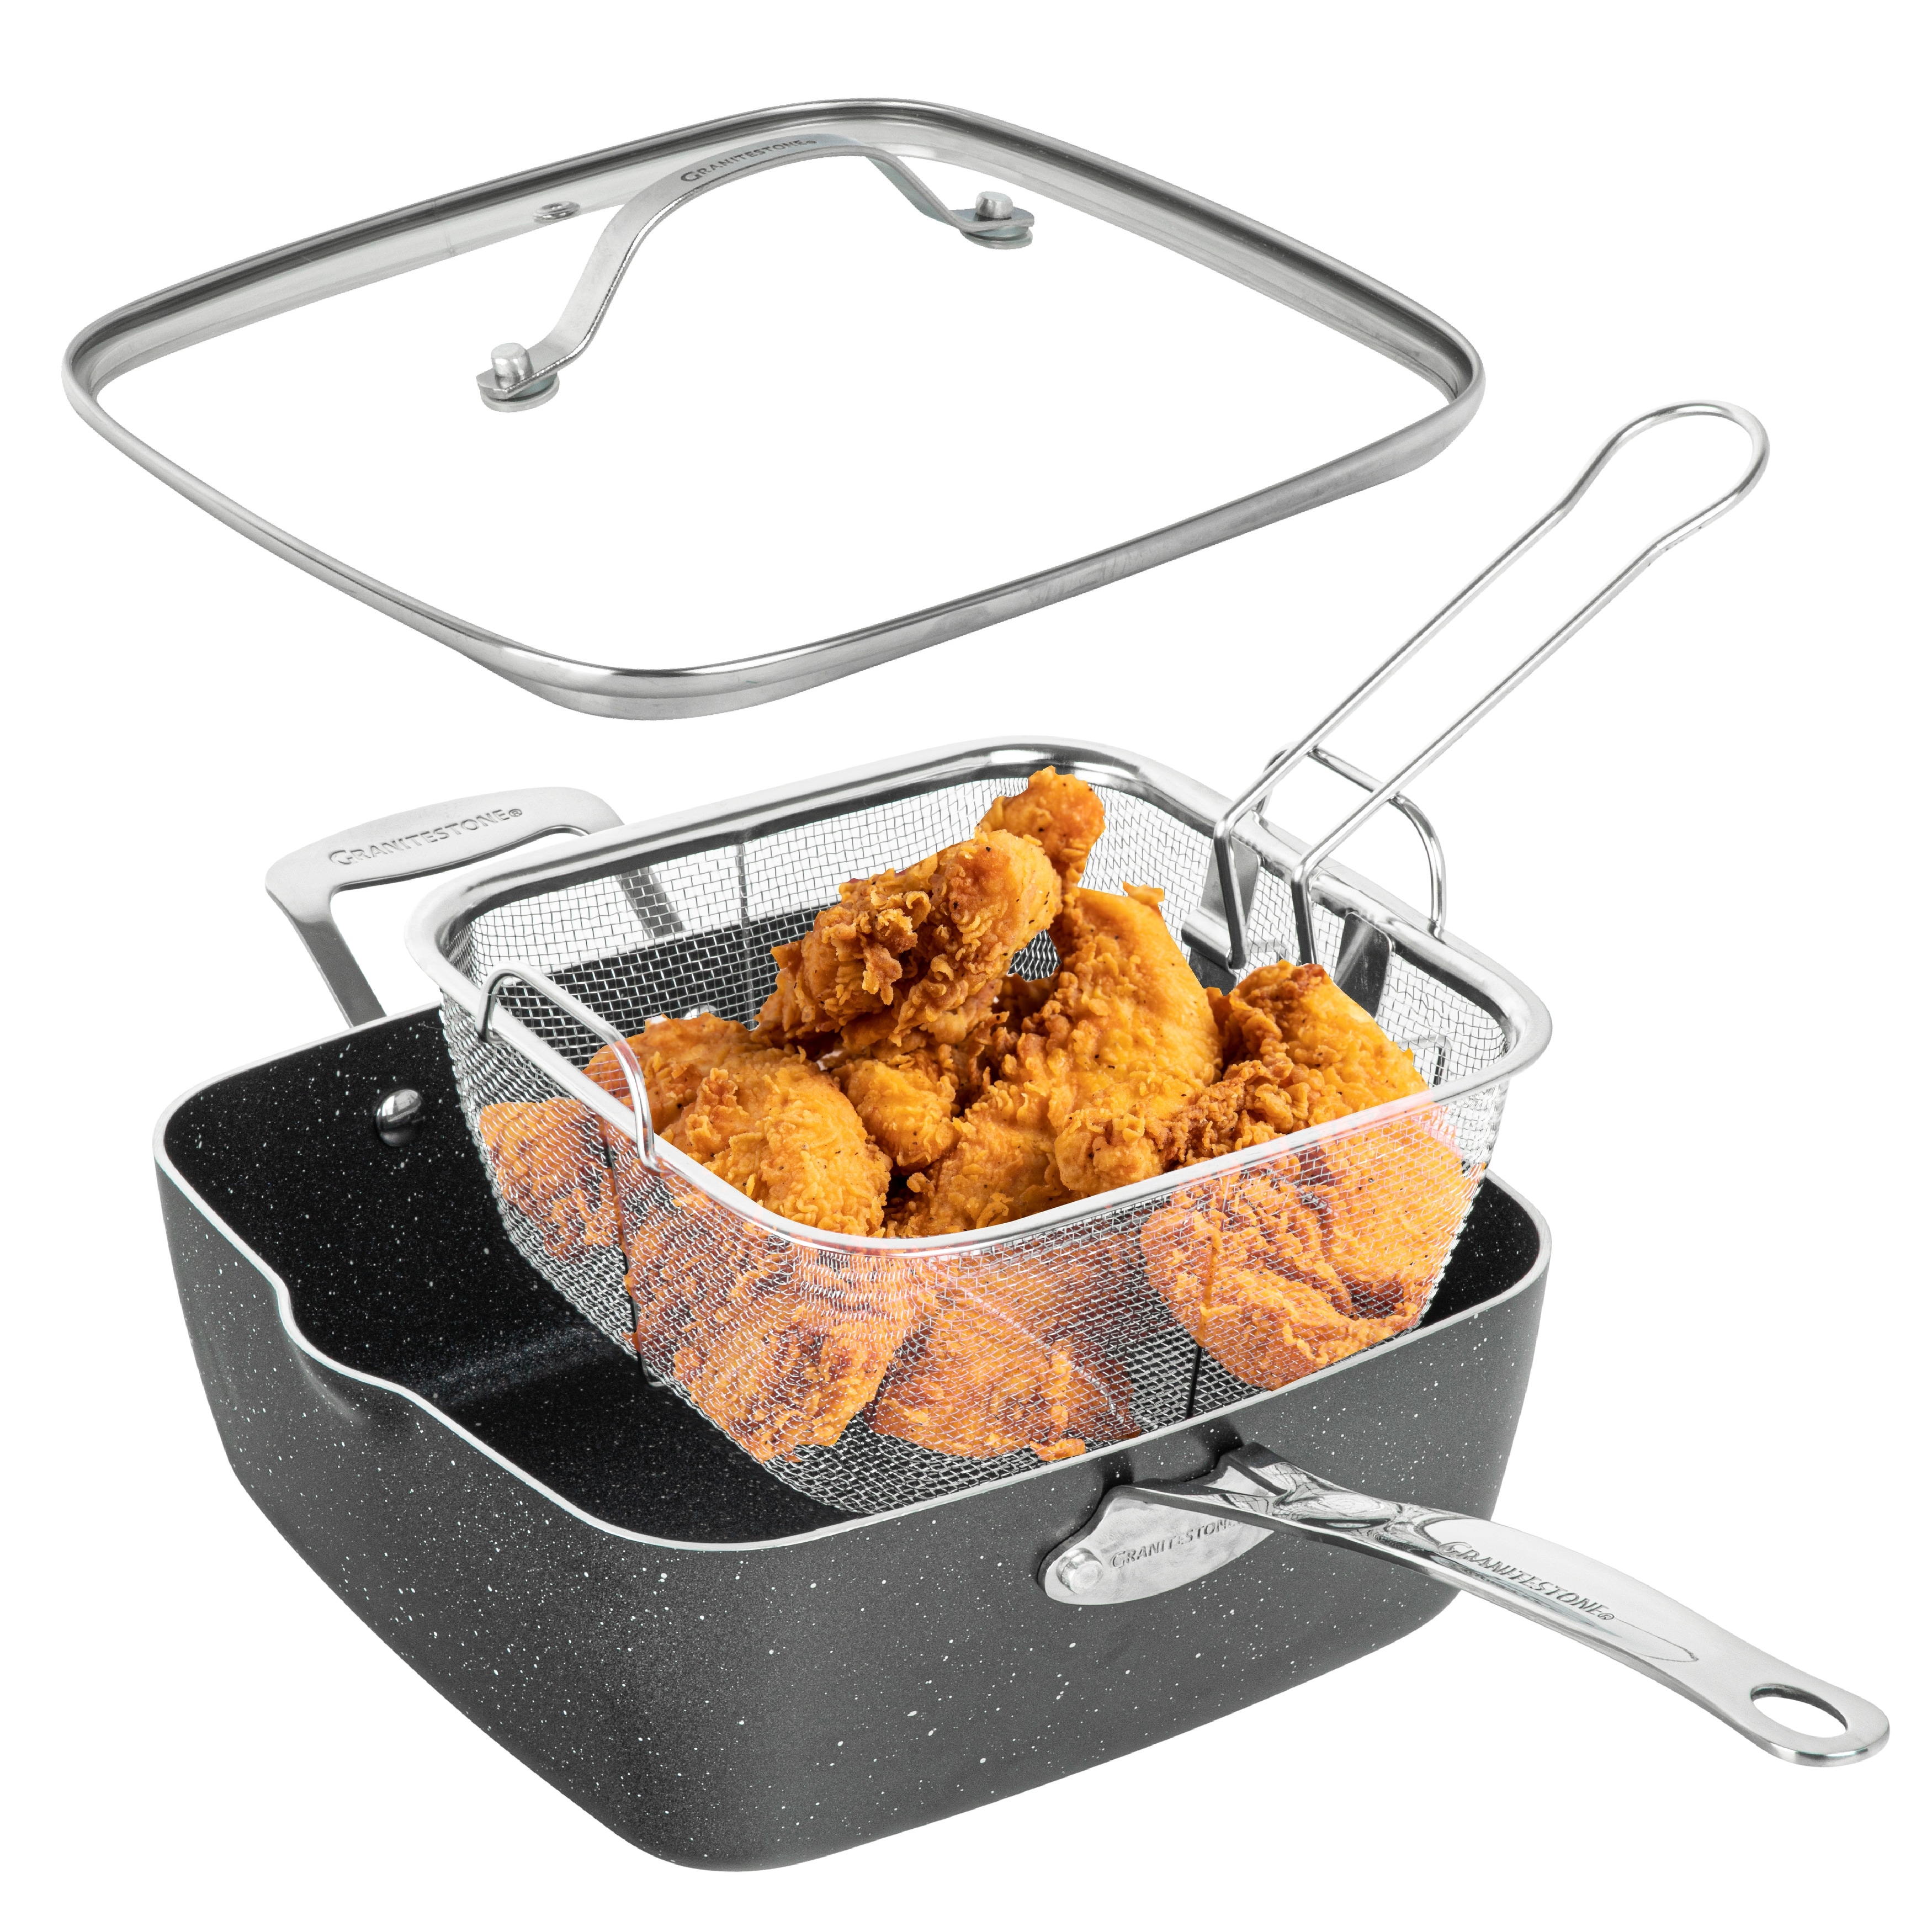 https://ak1.ostkcdn.com/images/products/is/images/direct/63e10ec2e6ddede6ab35ec7f4b90dd58ca660fbe/Granitestone-Nonstick-4-Pc-9.5-Inch-deep-Square-Pan-with-Fry-Basket-and-Steamer.jpg